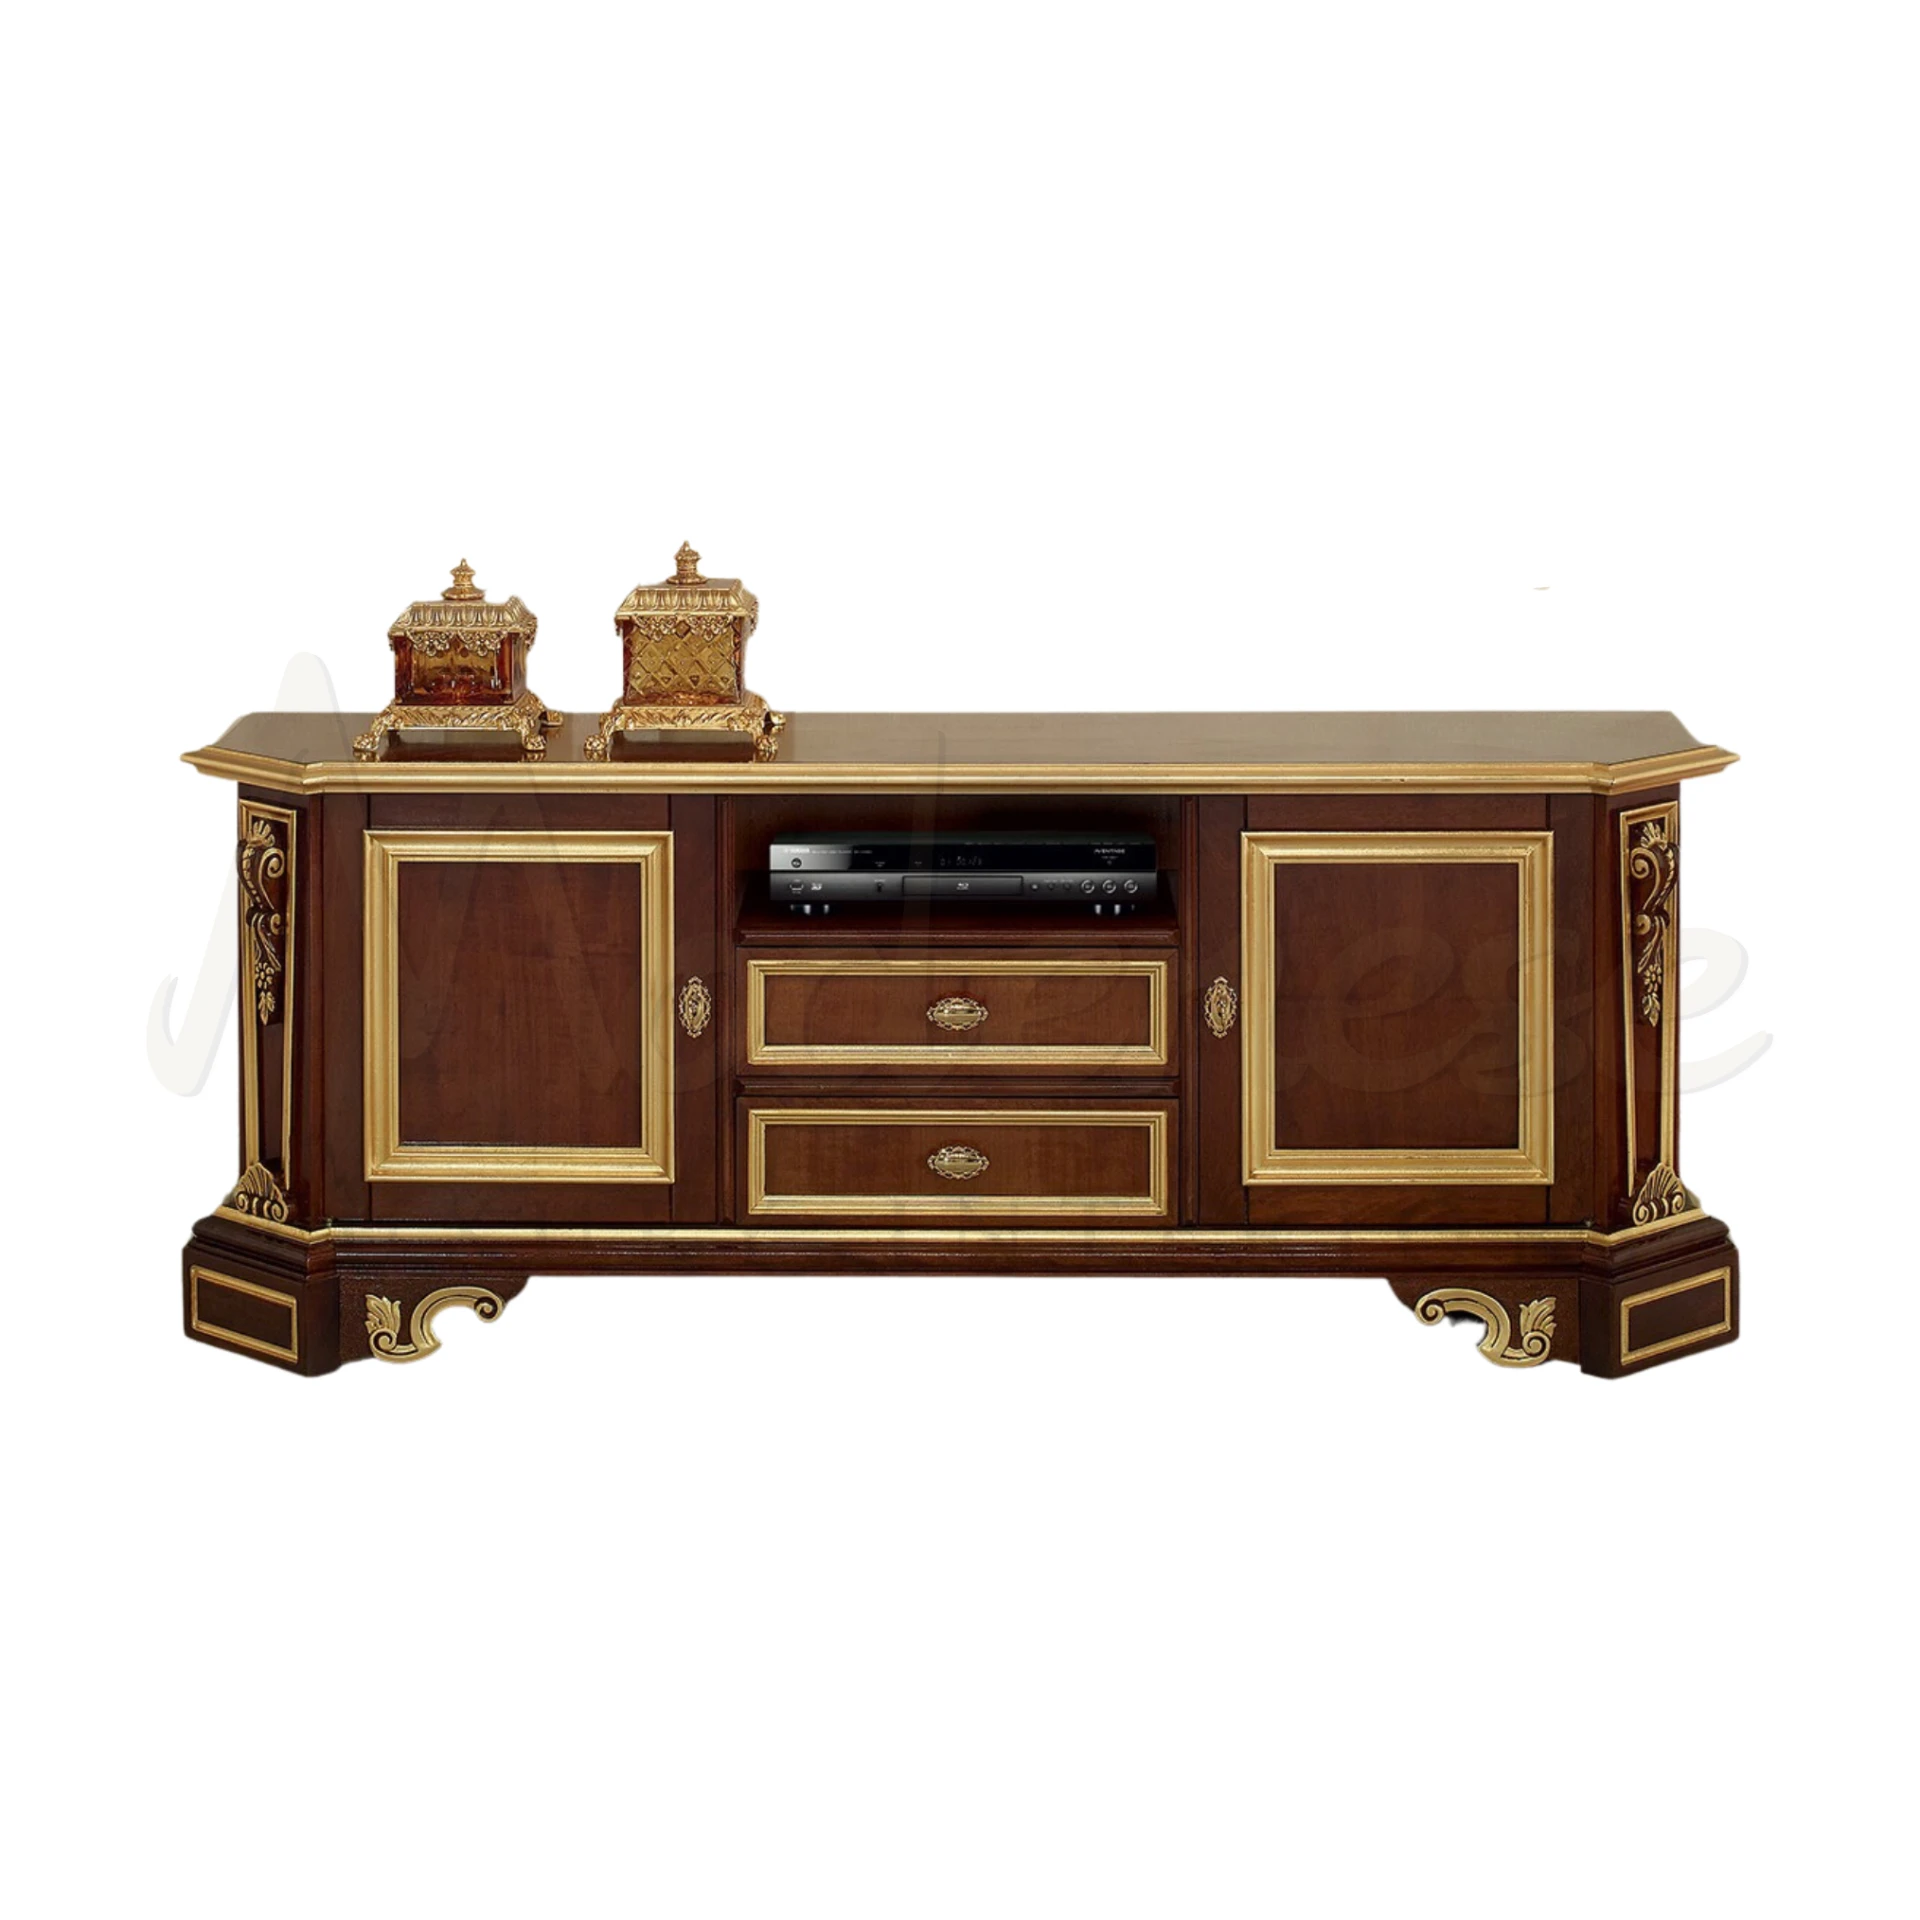 Classic Dark Brown TV Stand, Italian design with gold leaf ornamentation for a luxurious, warm interior atmosphere.